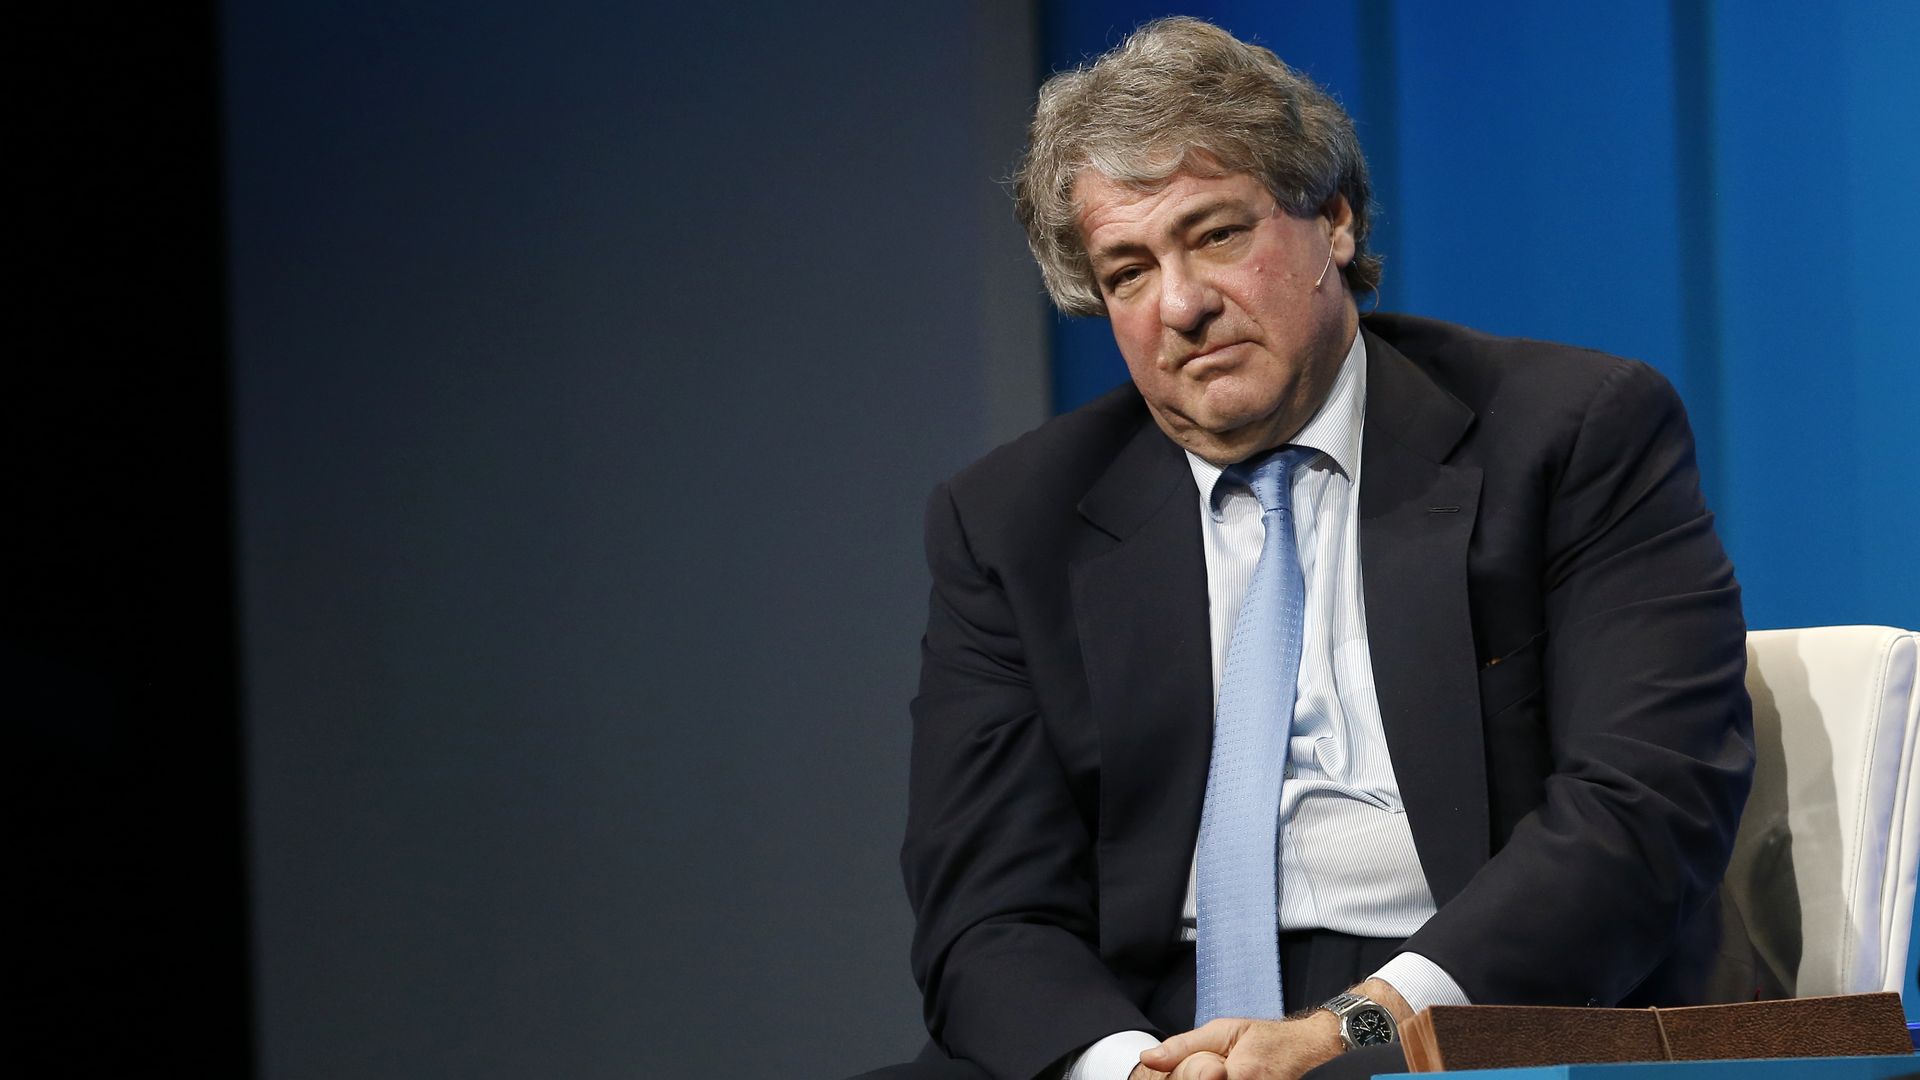 Leon Black at a conference.